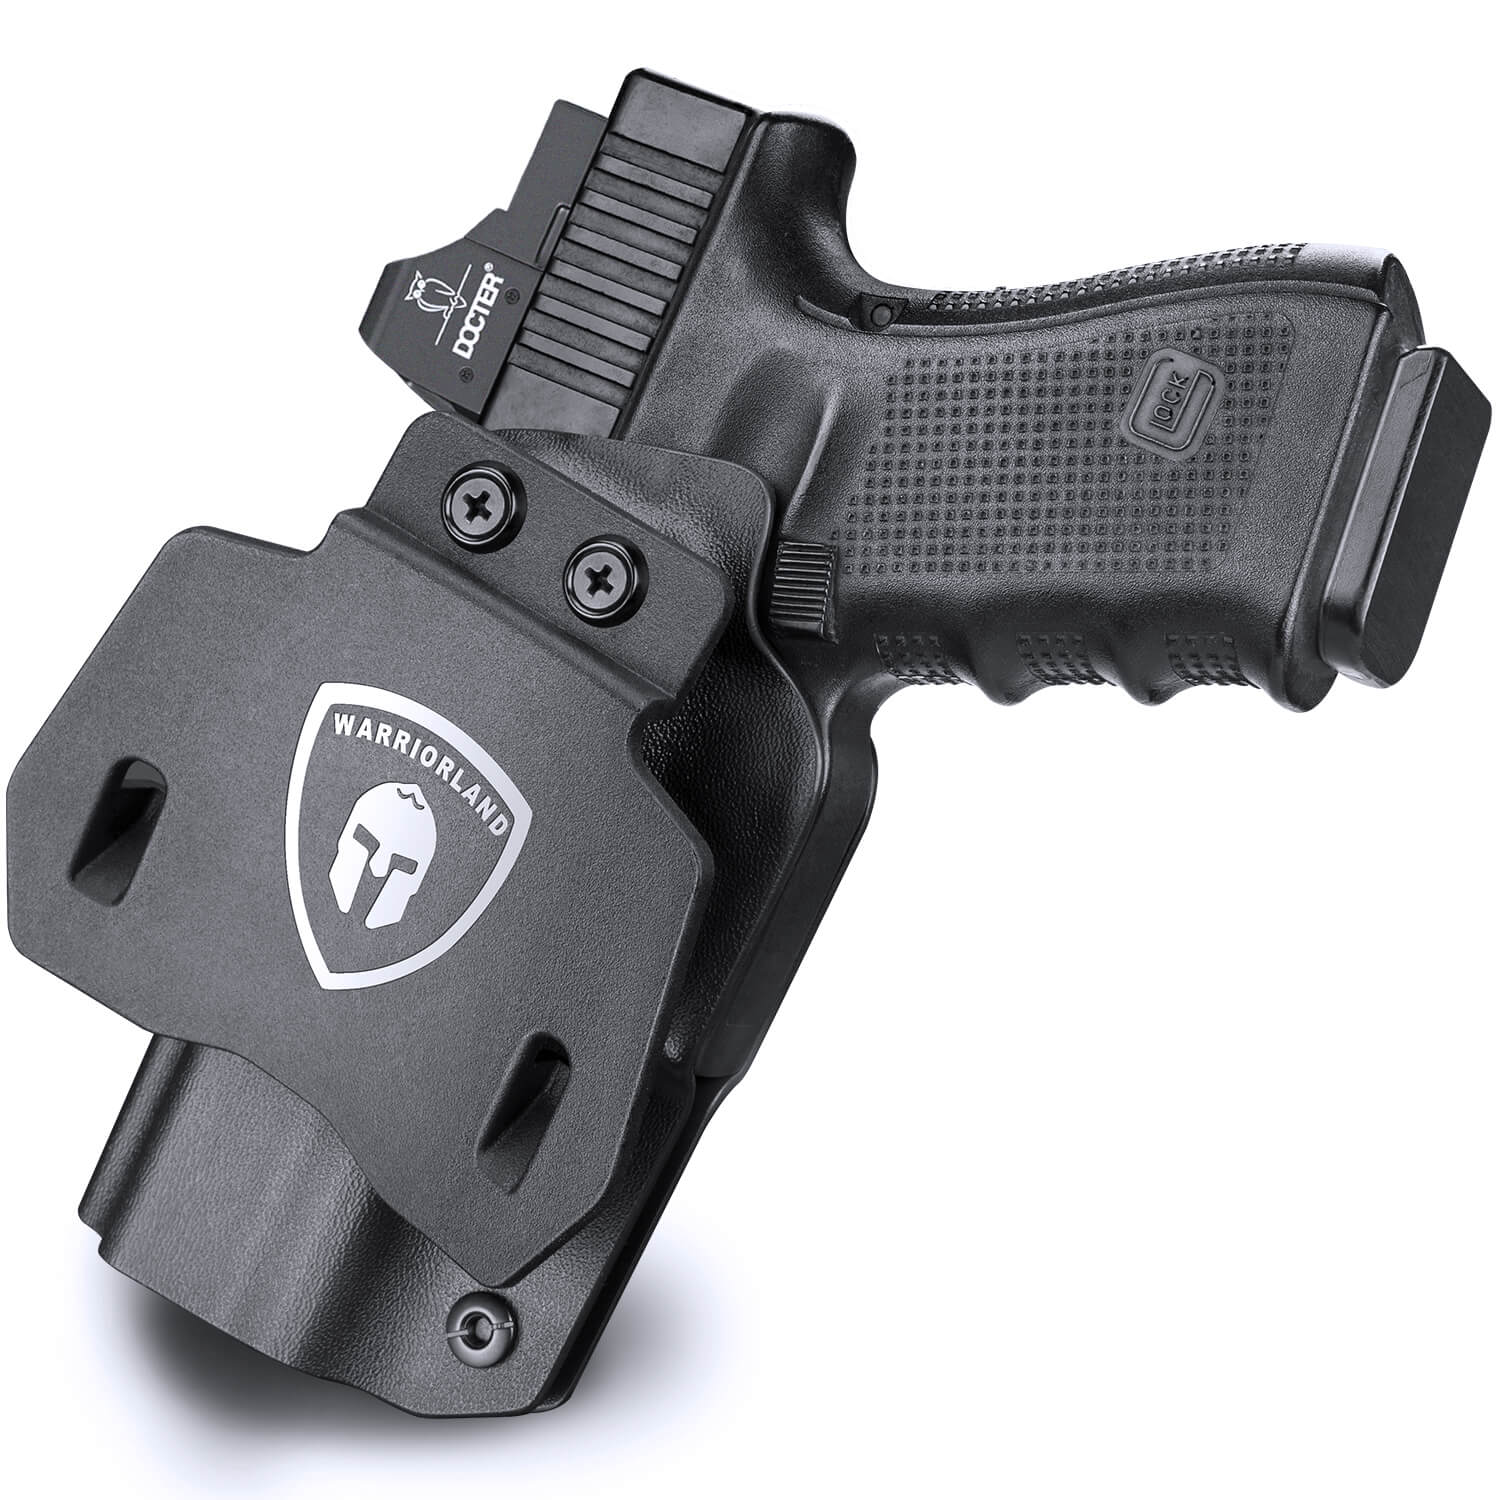 Single Stack vs Double Stack: Which One Is Right for You? - Vedder Holsters